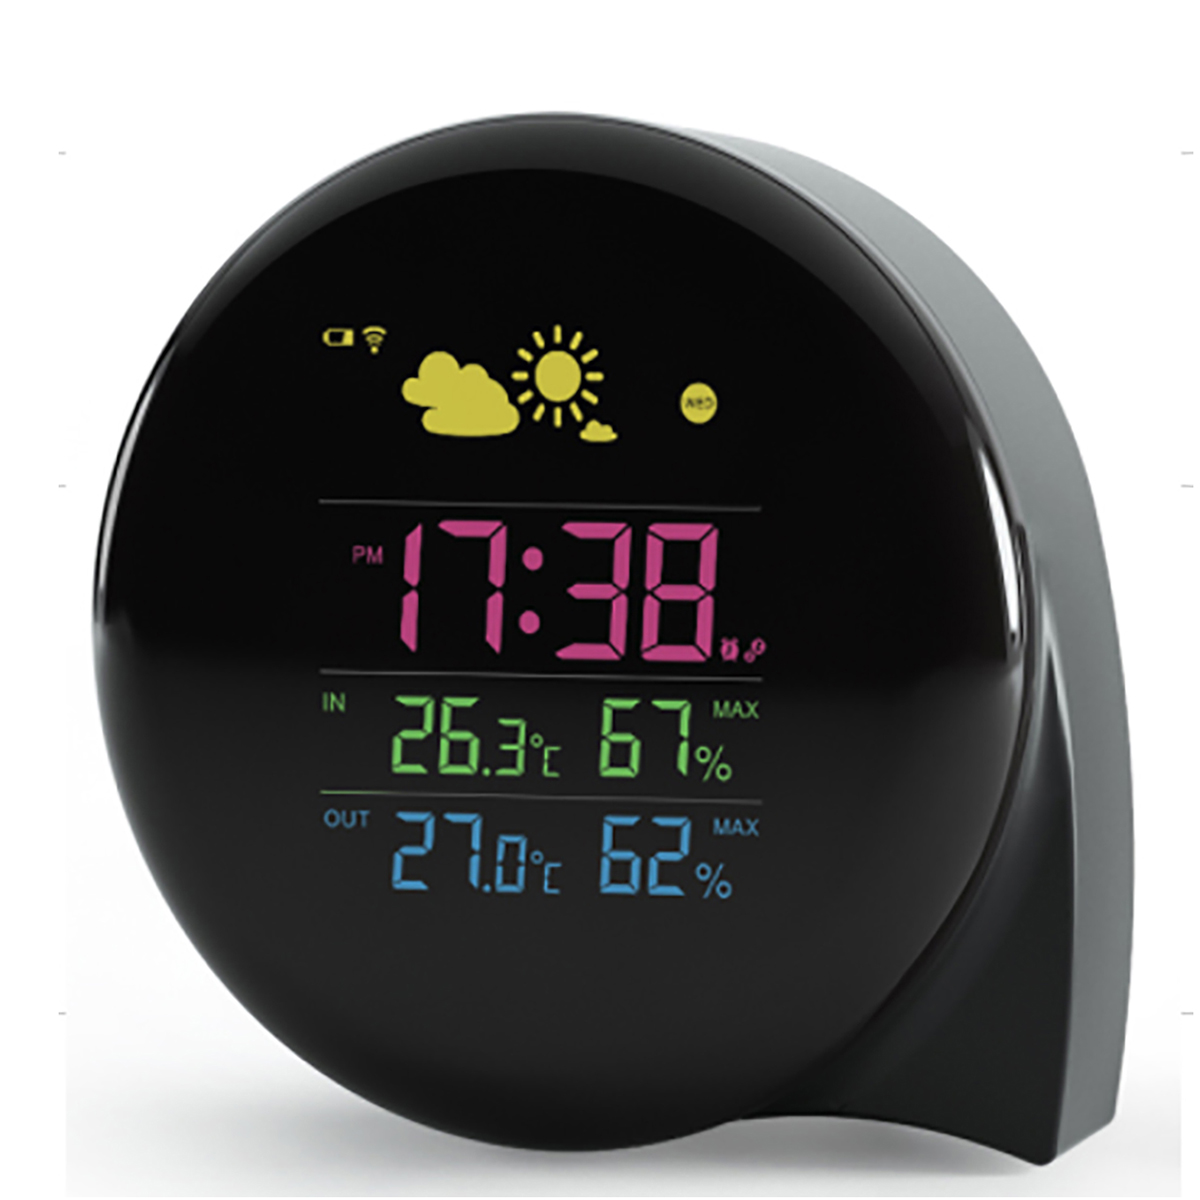 

Mini Comma Digital LED Screen Weather Station Indoor Outdoor Thermometer Hygrometer Weather Forecast Daily Clock with Snooze Function Temperature Humidity Sensor